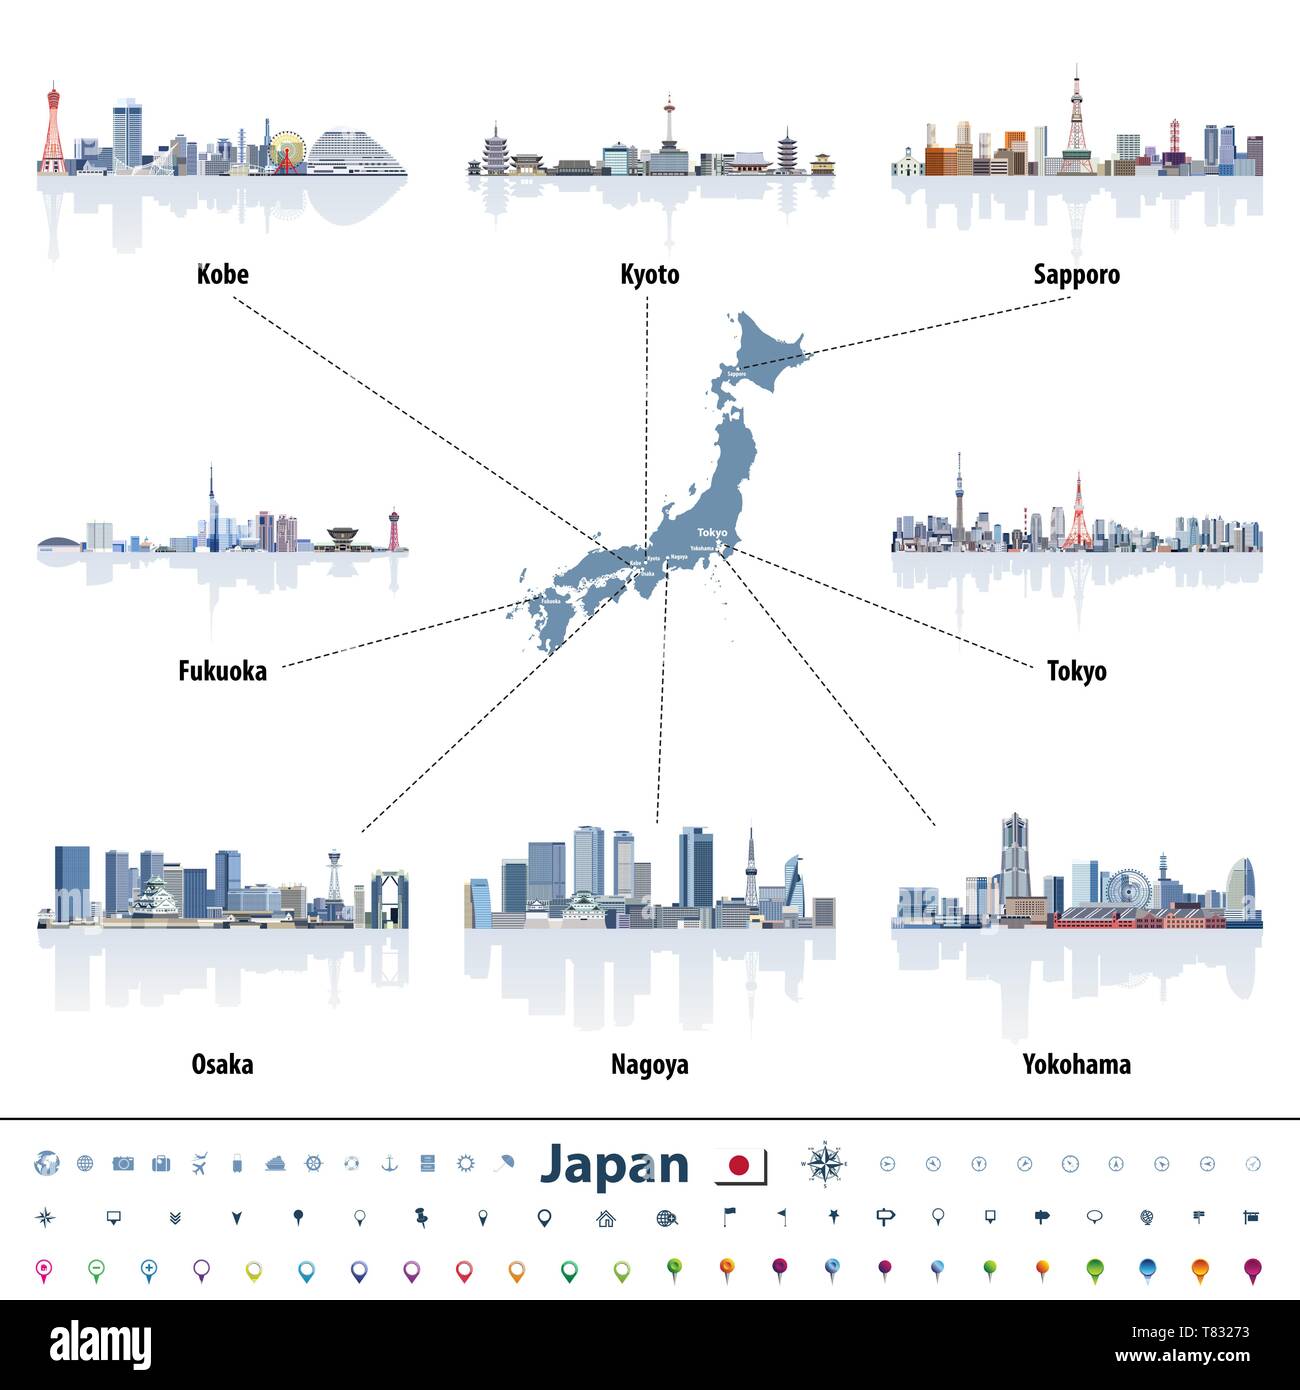 japanese map with largest Japan cities skylines Stock Vector